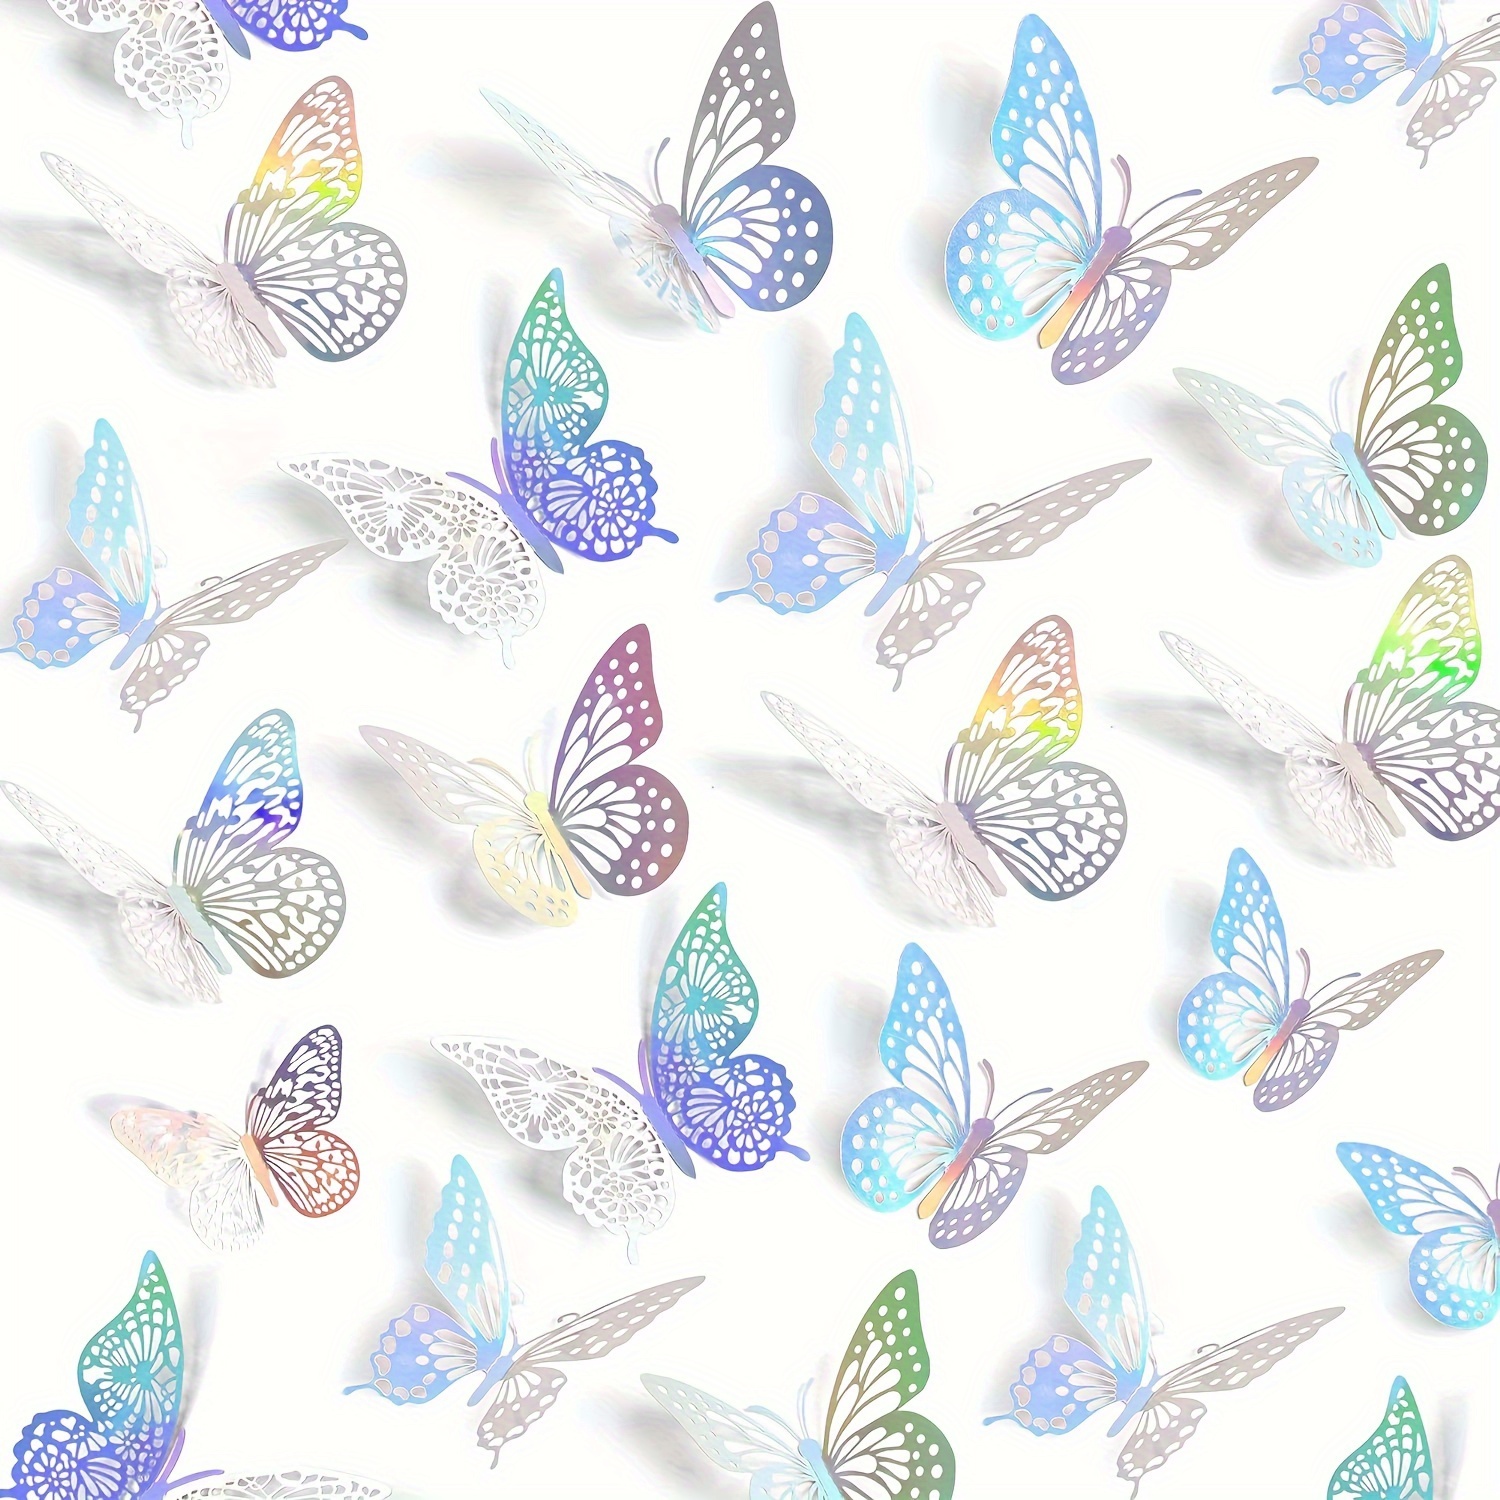 

48-piece 3d Metallic Butterfly Wall Decor Set - Various Designs & Dimensions, Detachable Holographic Insects For Celebrations, Cake Embellishments & More.